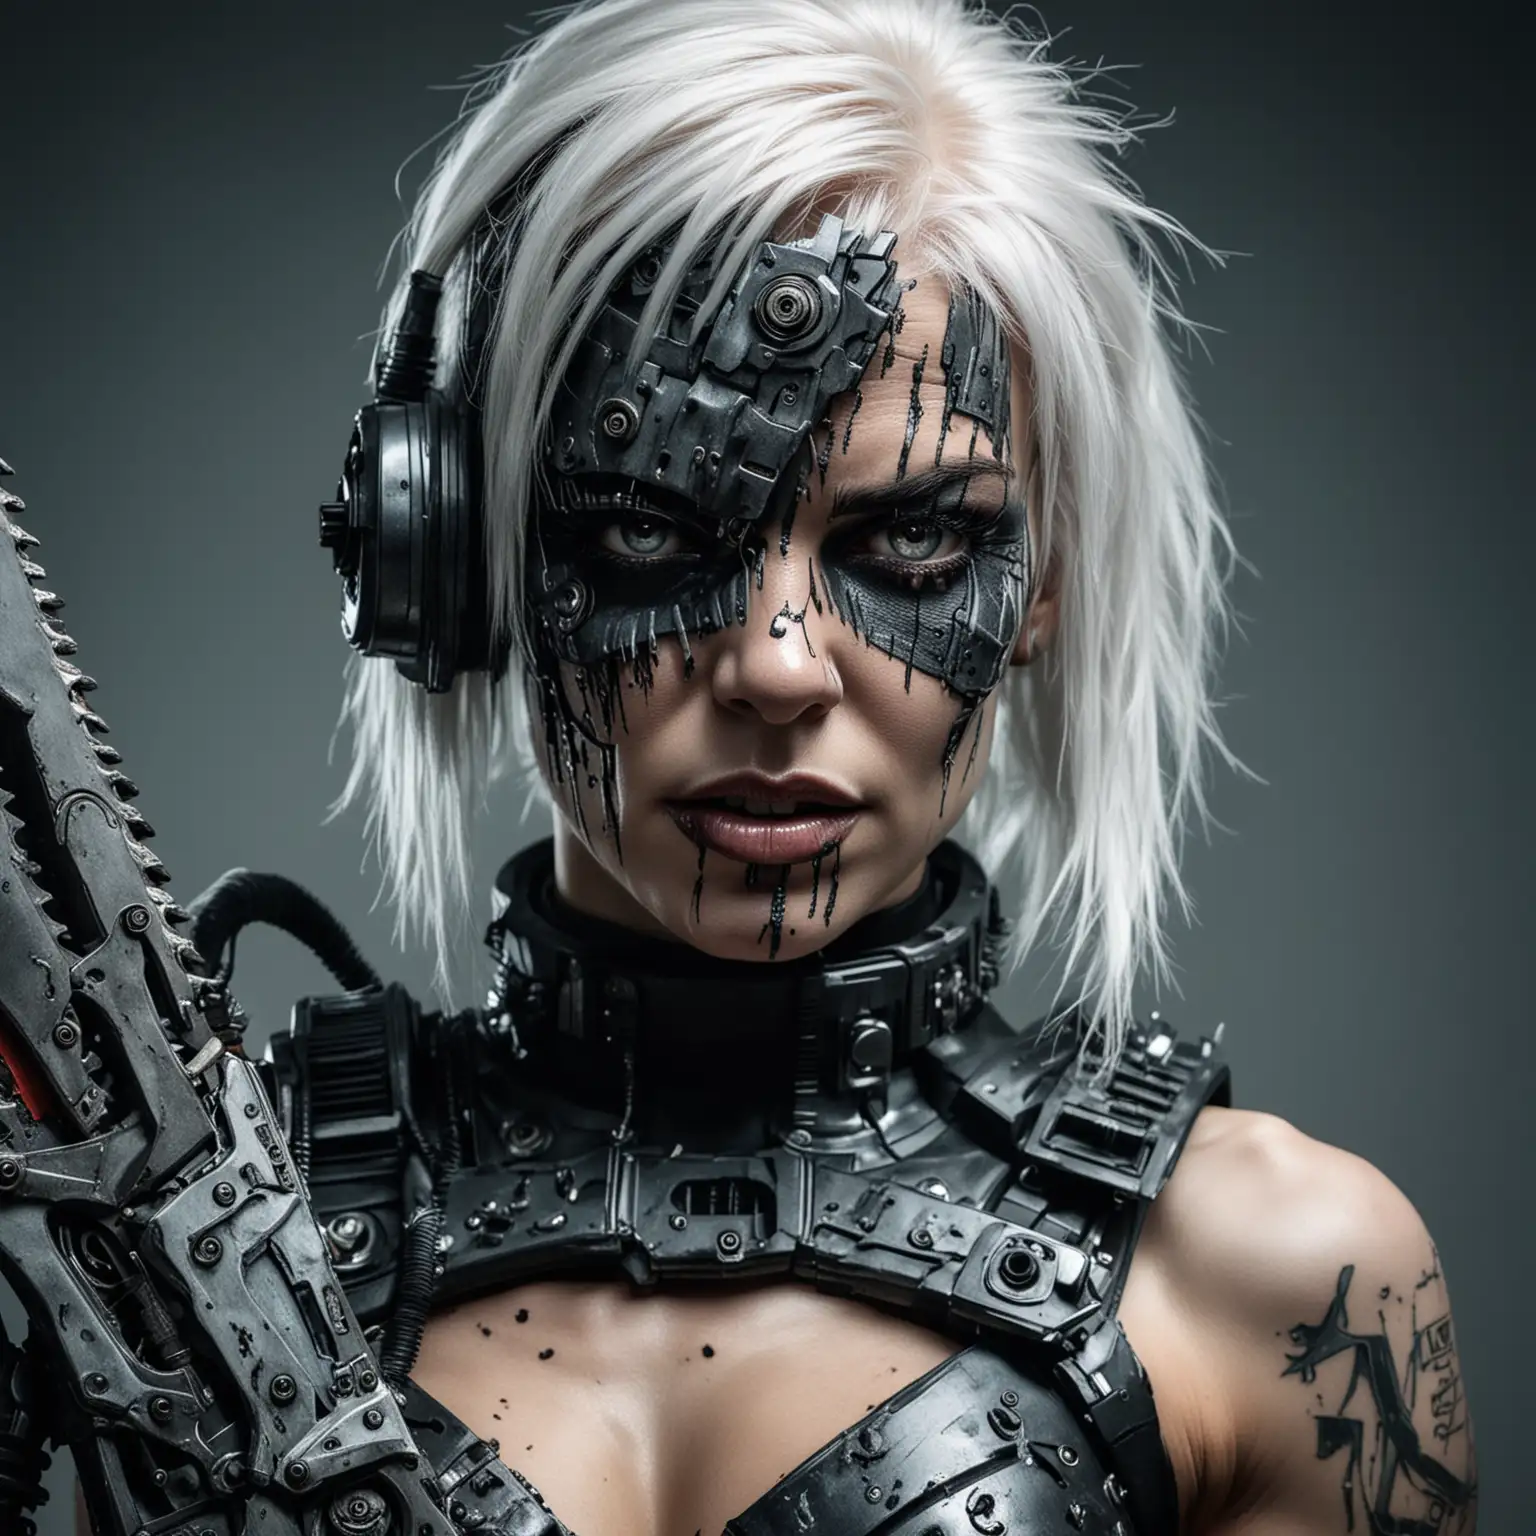 Scarred Cyberpunk Woman with Chainsaw and Cybernetic Enhancements